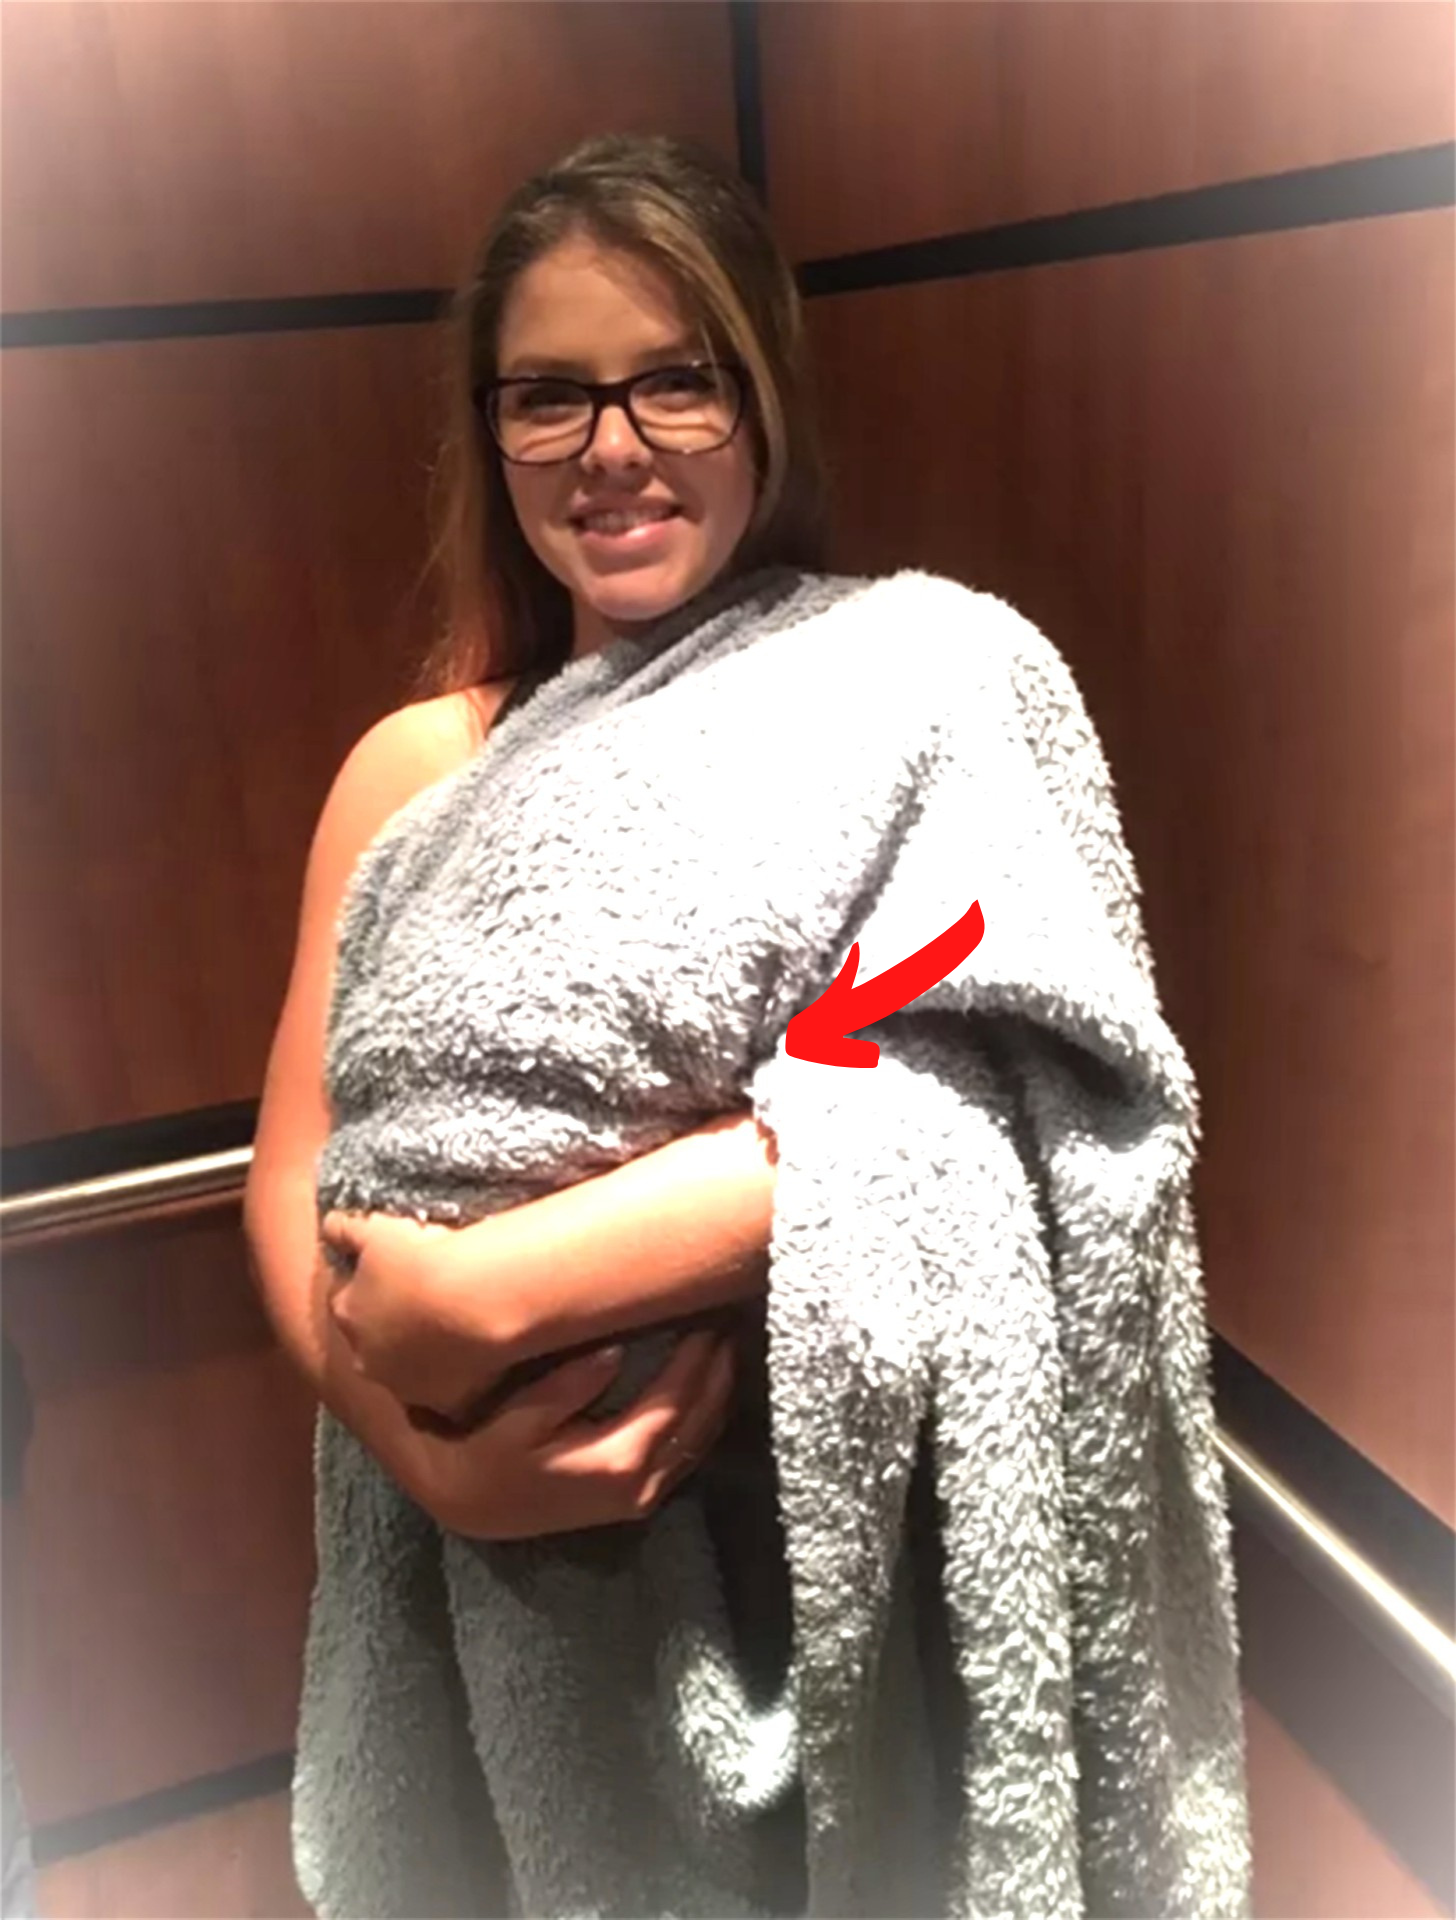 My daughter carried a blanket covering what everyone assumed was a child into the hospital, but when she revealed